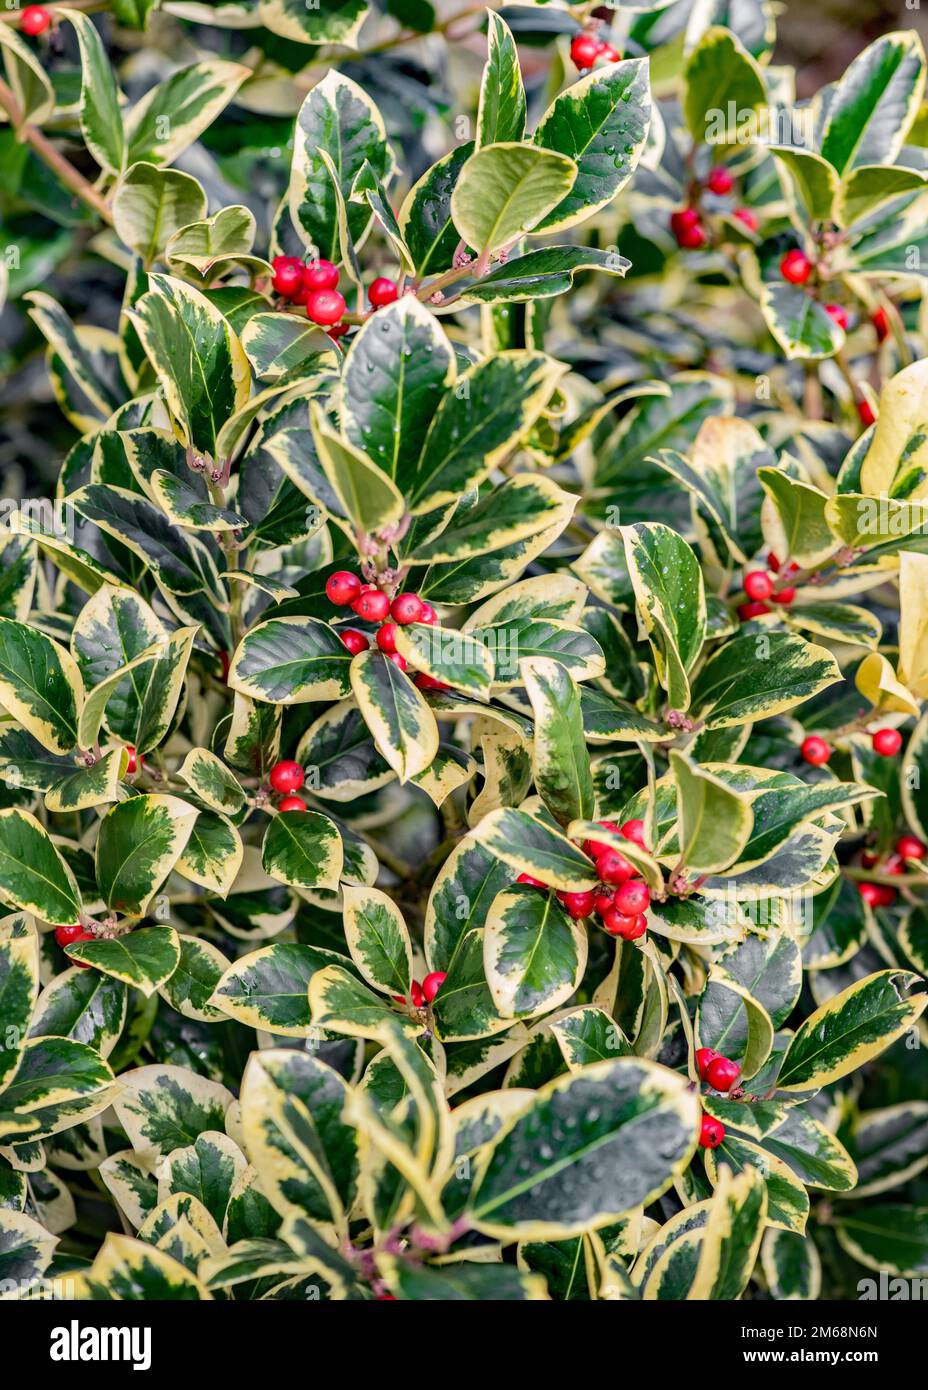 Ilex altaclerensis Golden King Holly tree.The glossy green leaves are flat and rounded in shape with beautiful golden yellow variegated margins Stock Photo